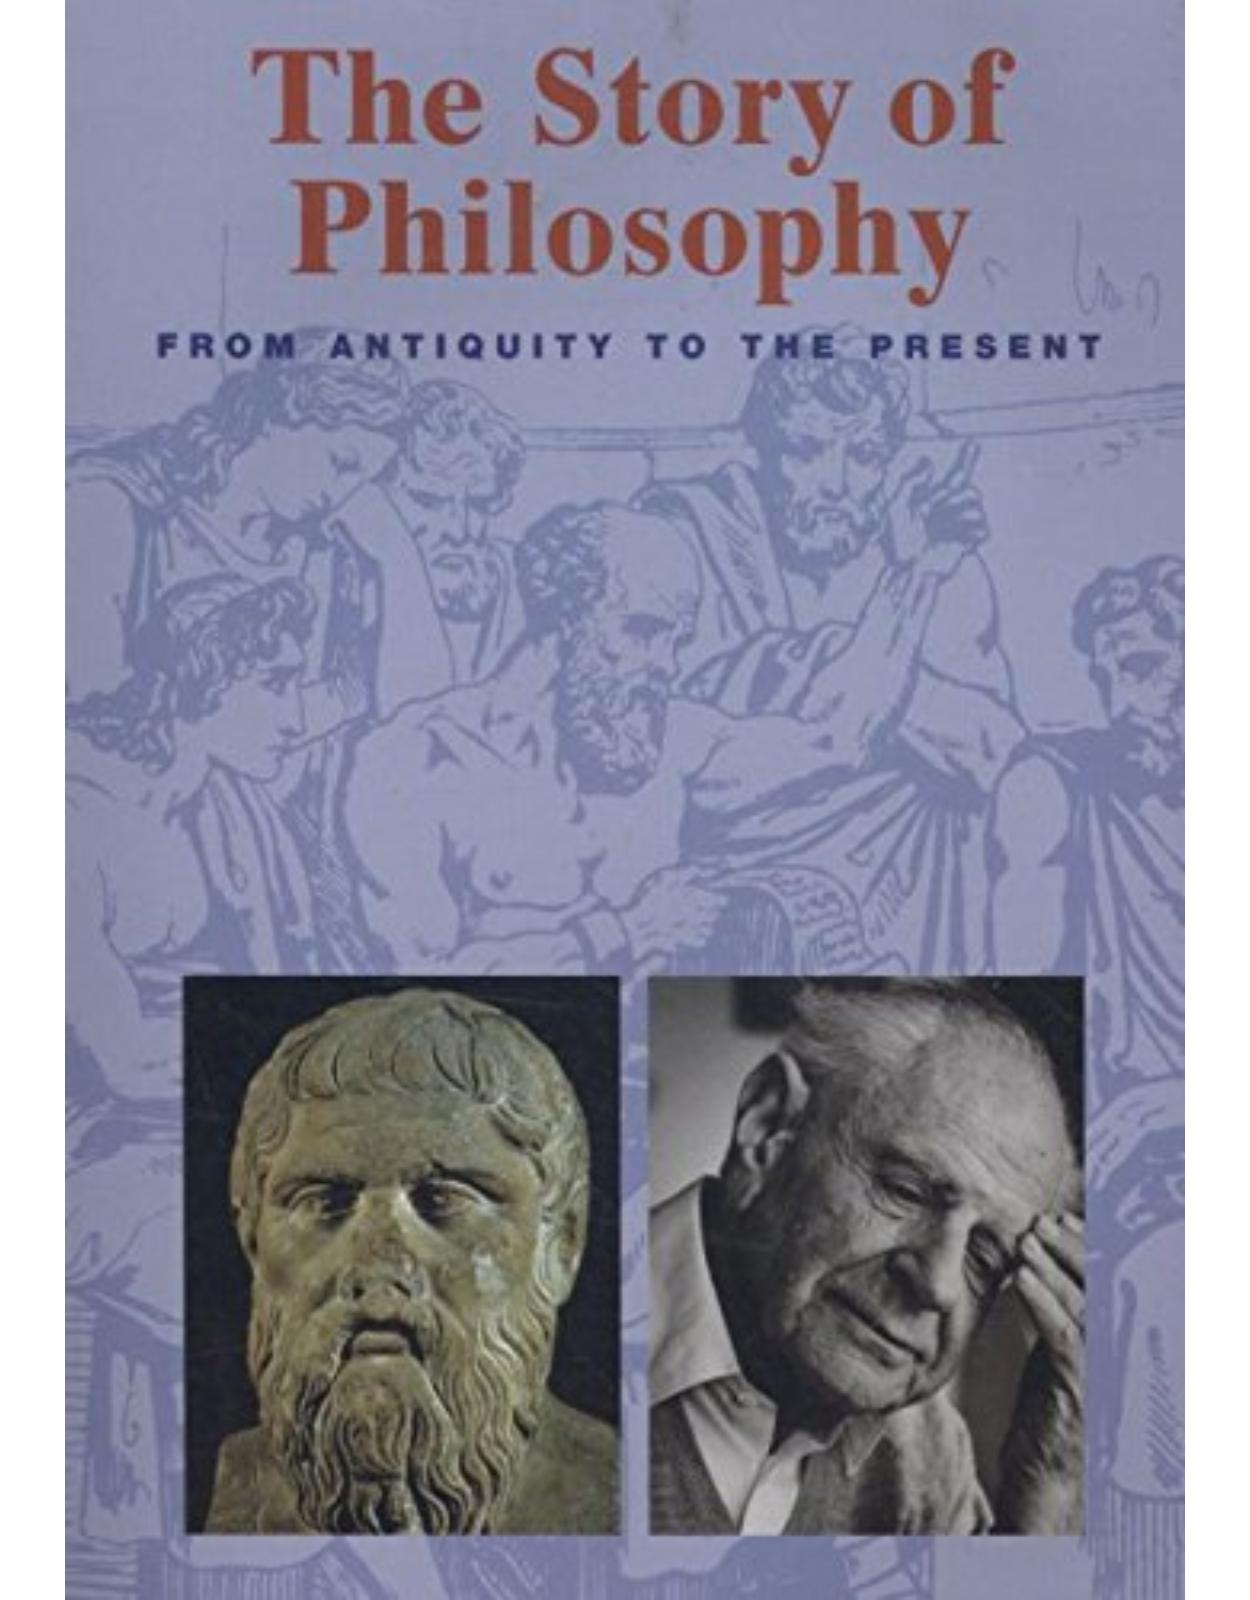 The Story of Philosophy from antiquity to the present